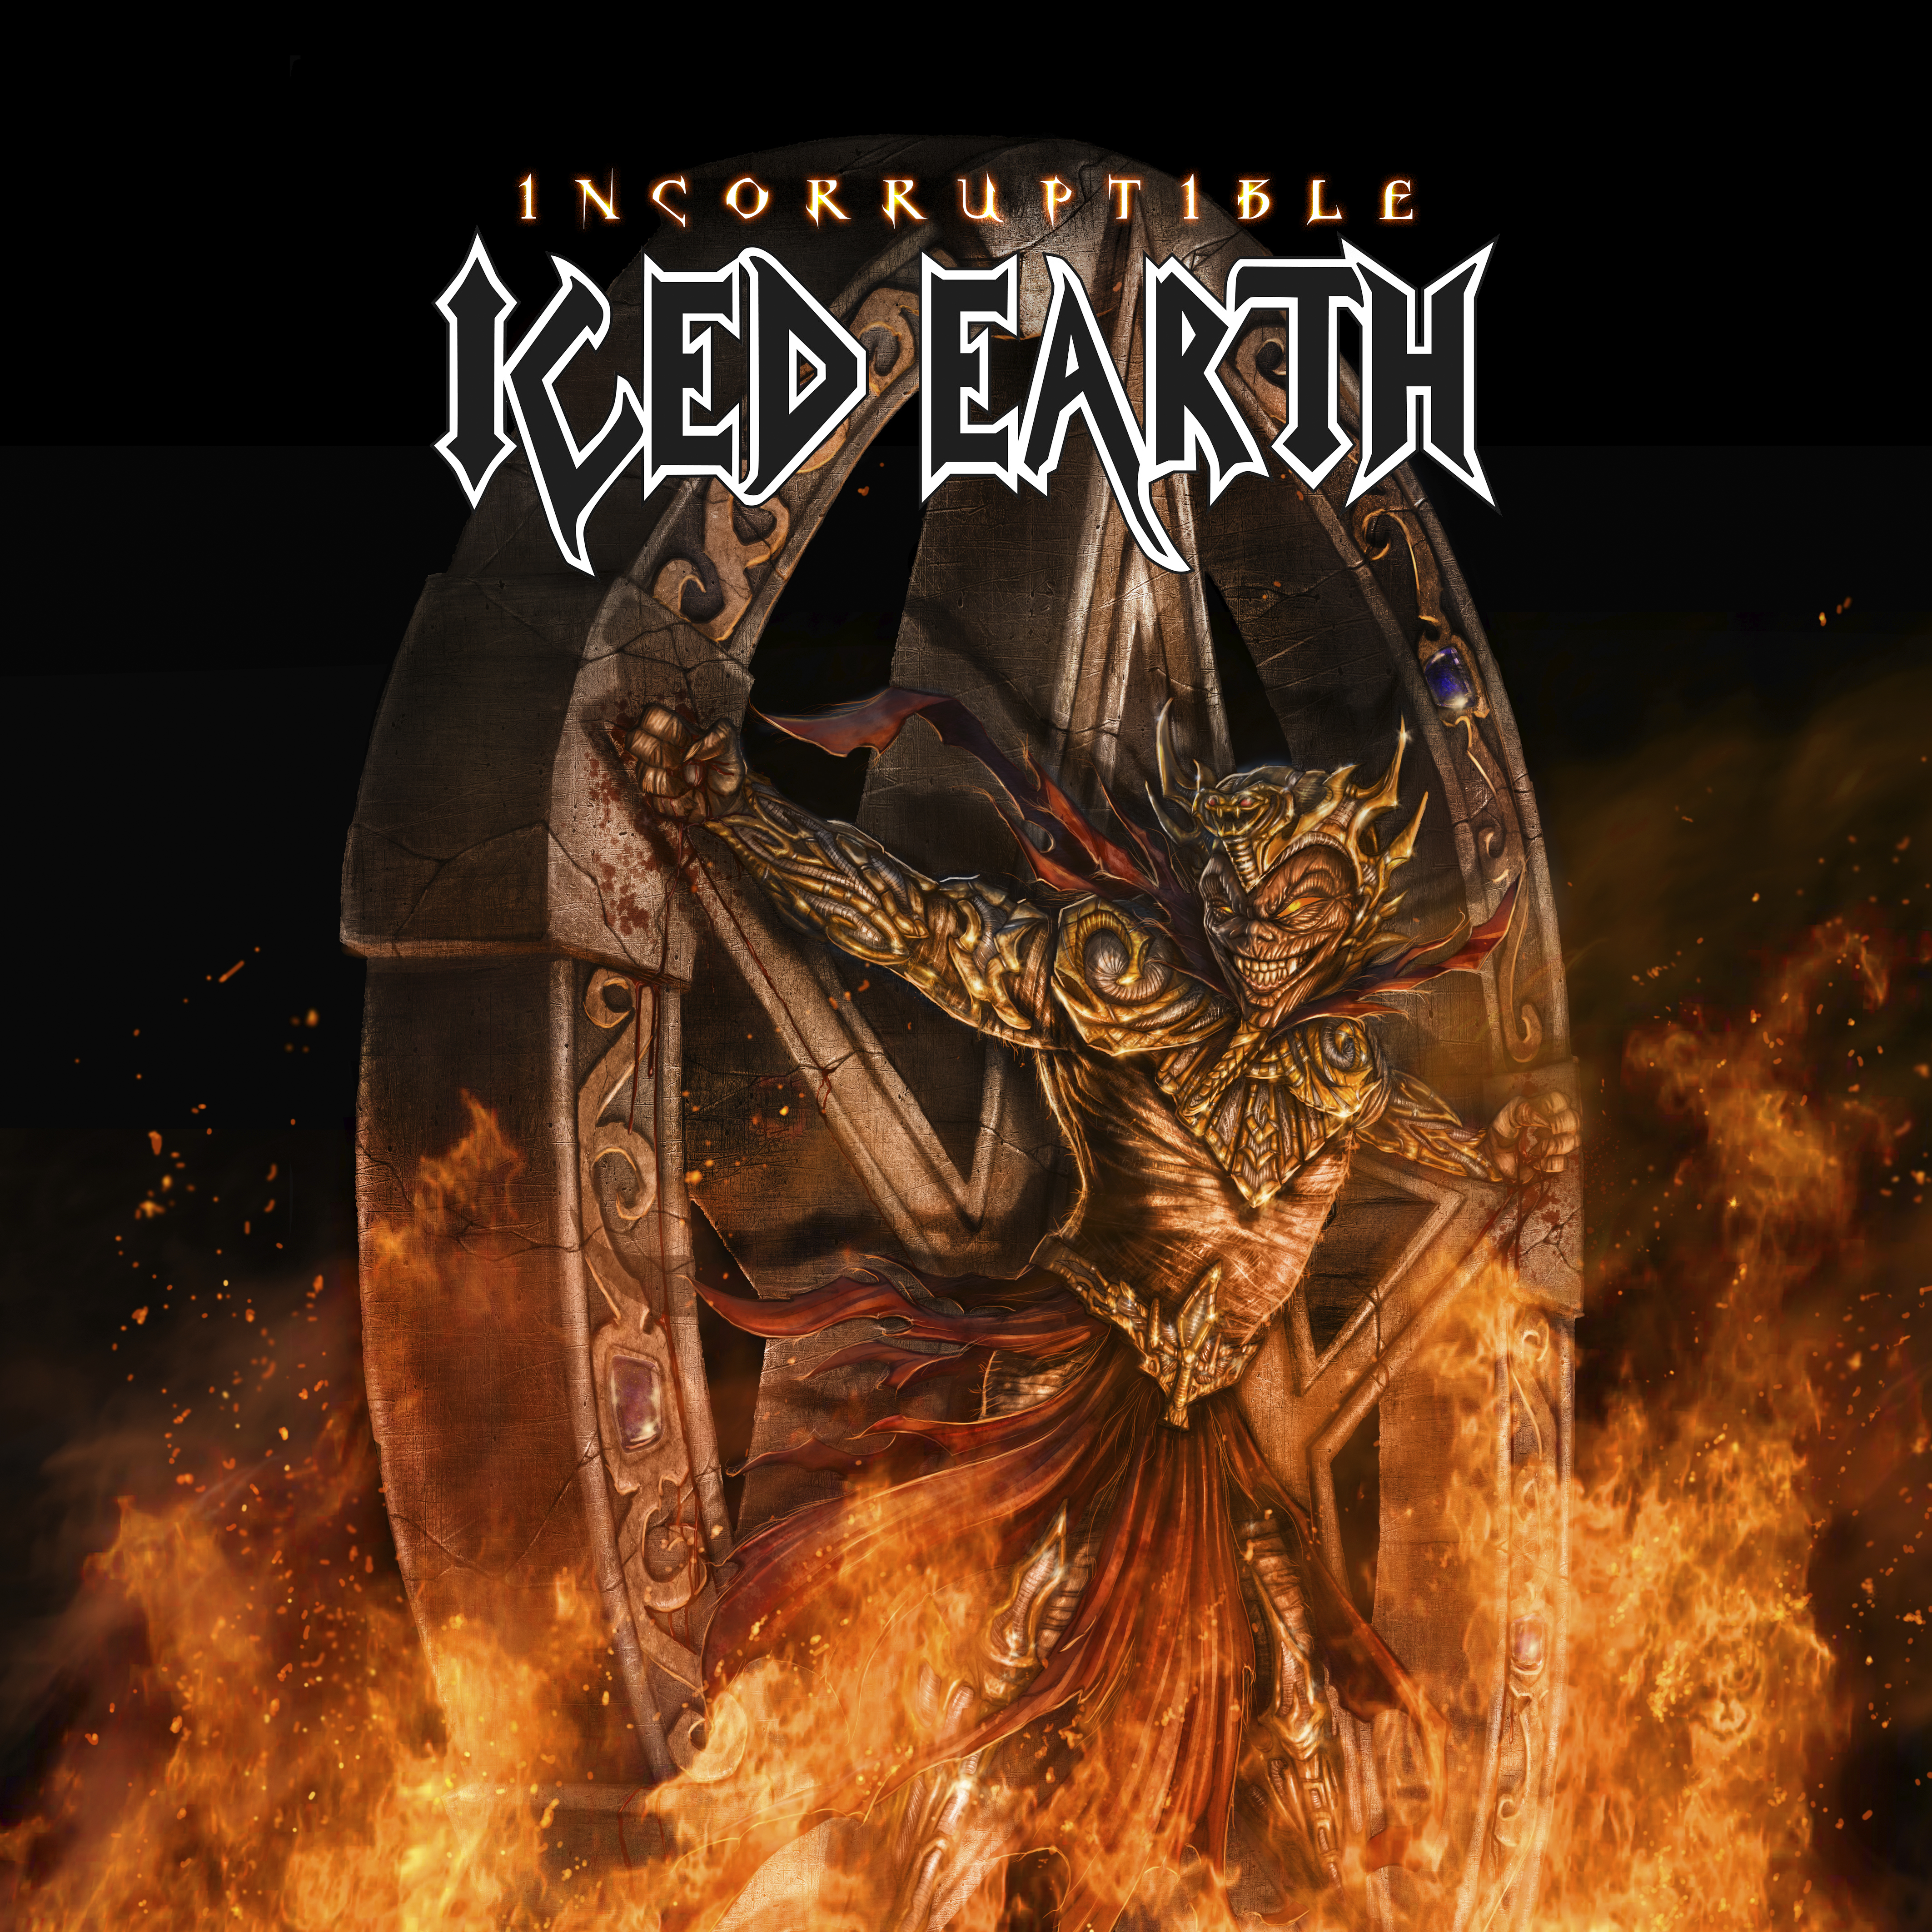 Iced Earth (USA) – Incorruptible